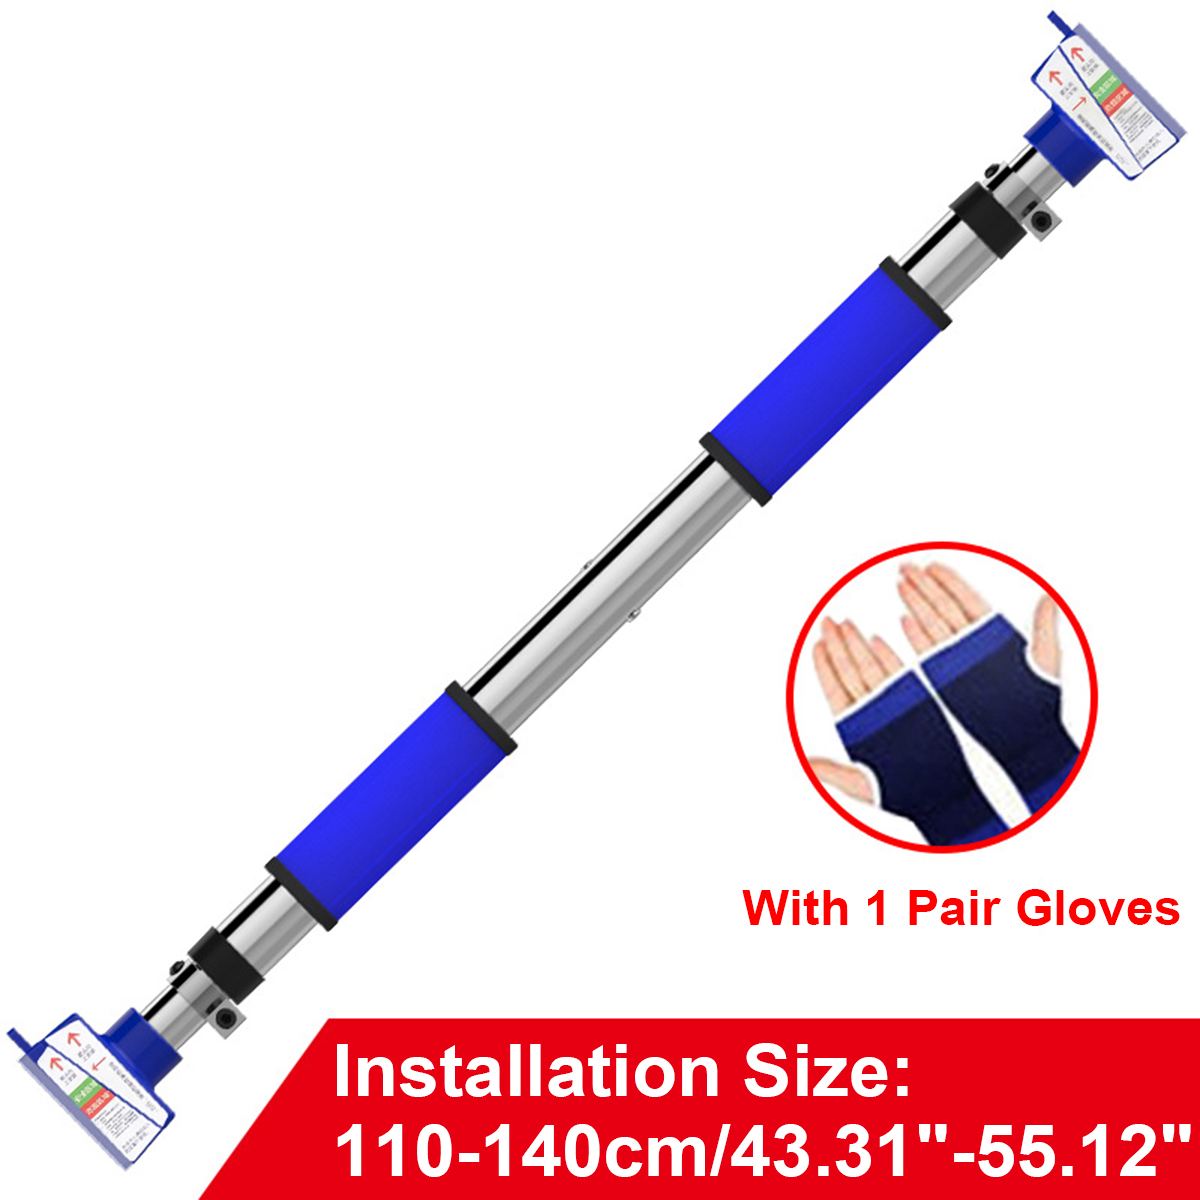 2in1 Door Horizontal Bars Adjustable Steel/Home Gym Workout Chin-Up Pull Up